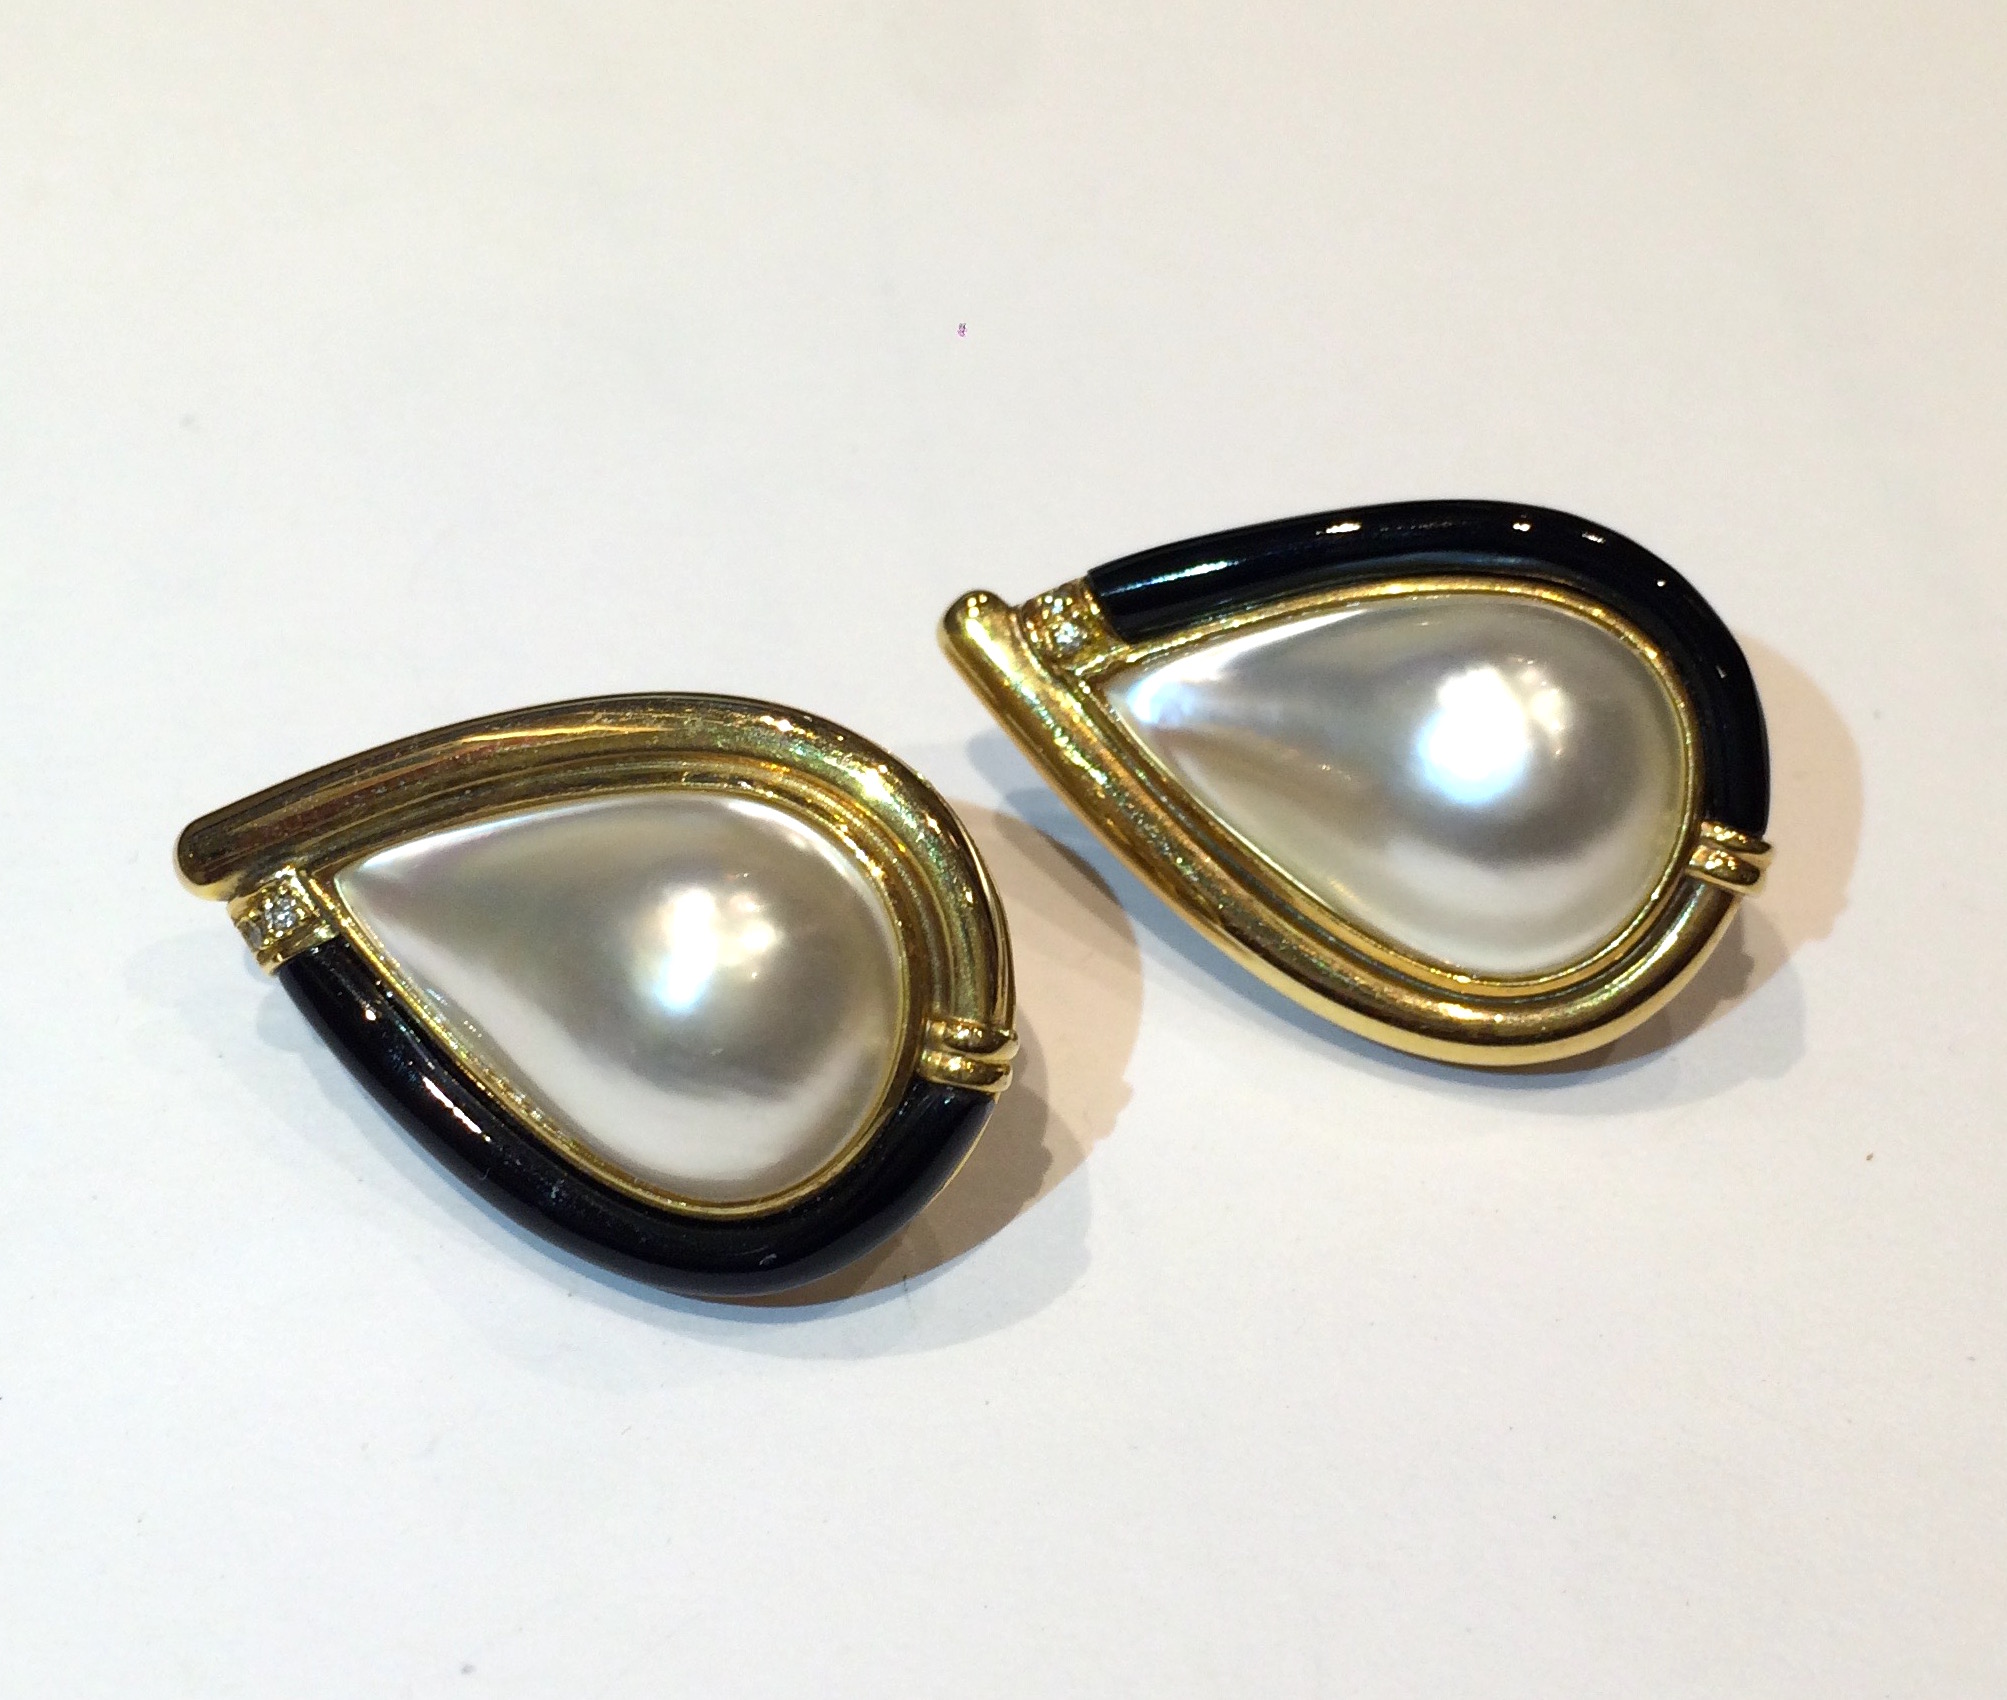 European pear shape clip earrings set with large mabe pearls, contoured onyx all in a yellow gold mount and further set with four round cut diamonds, marked, c.1980’s